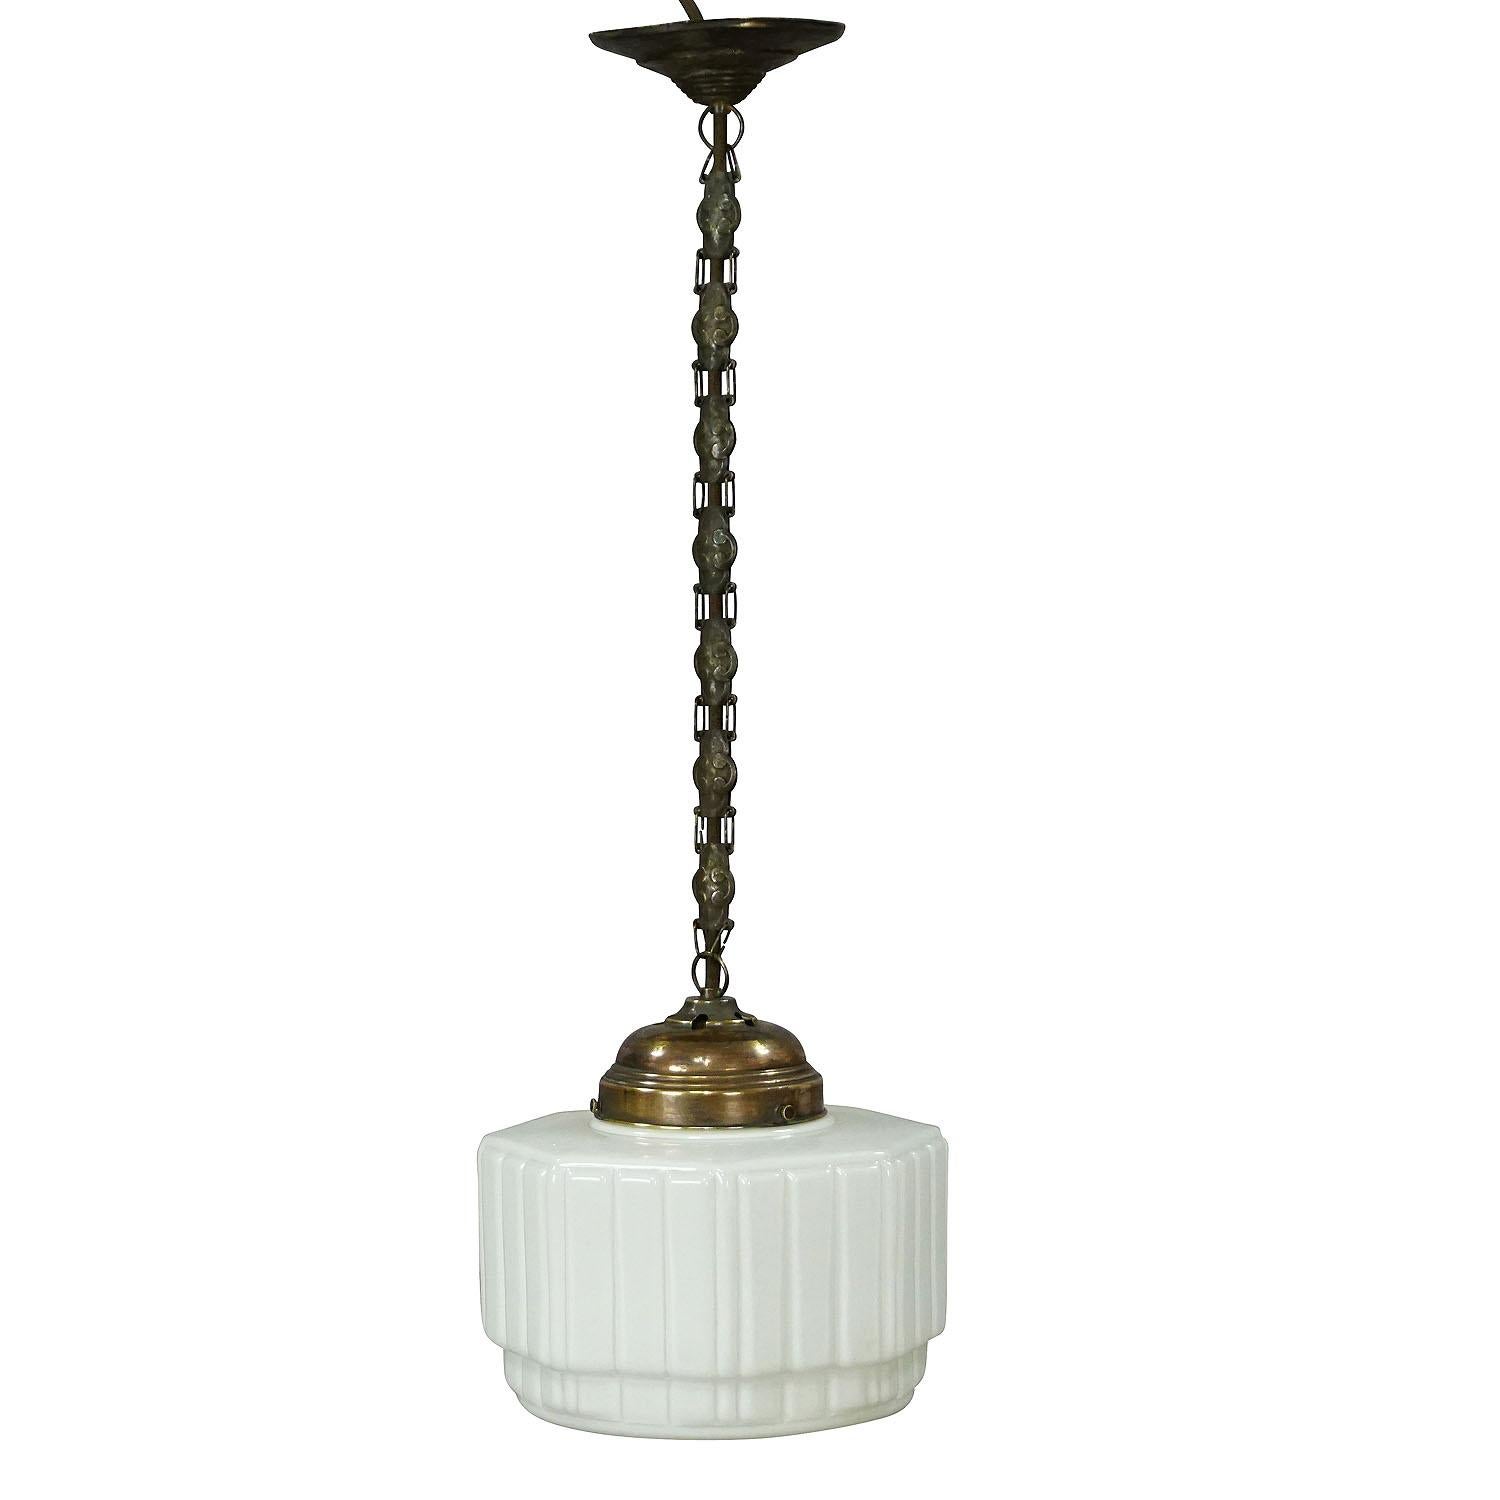 Antique pendant light with large white glass shade ca. 1920

An antique pendant lamp - a white opaline glass shade with ribbed decor and a very nice brass and metal suspension. Made in Germany, ca. 1920. Cabling is renewed, working order. With